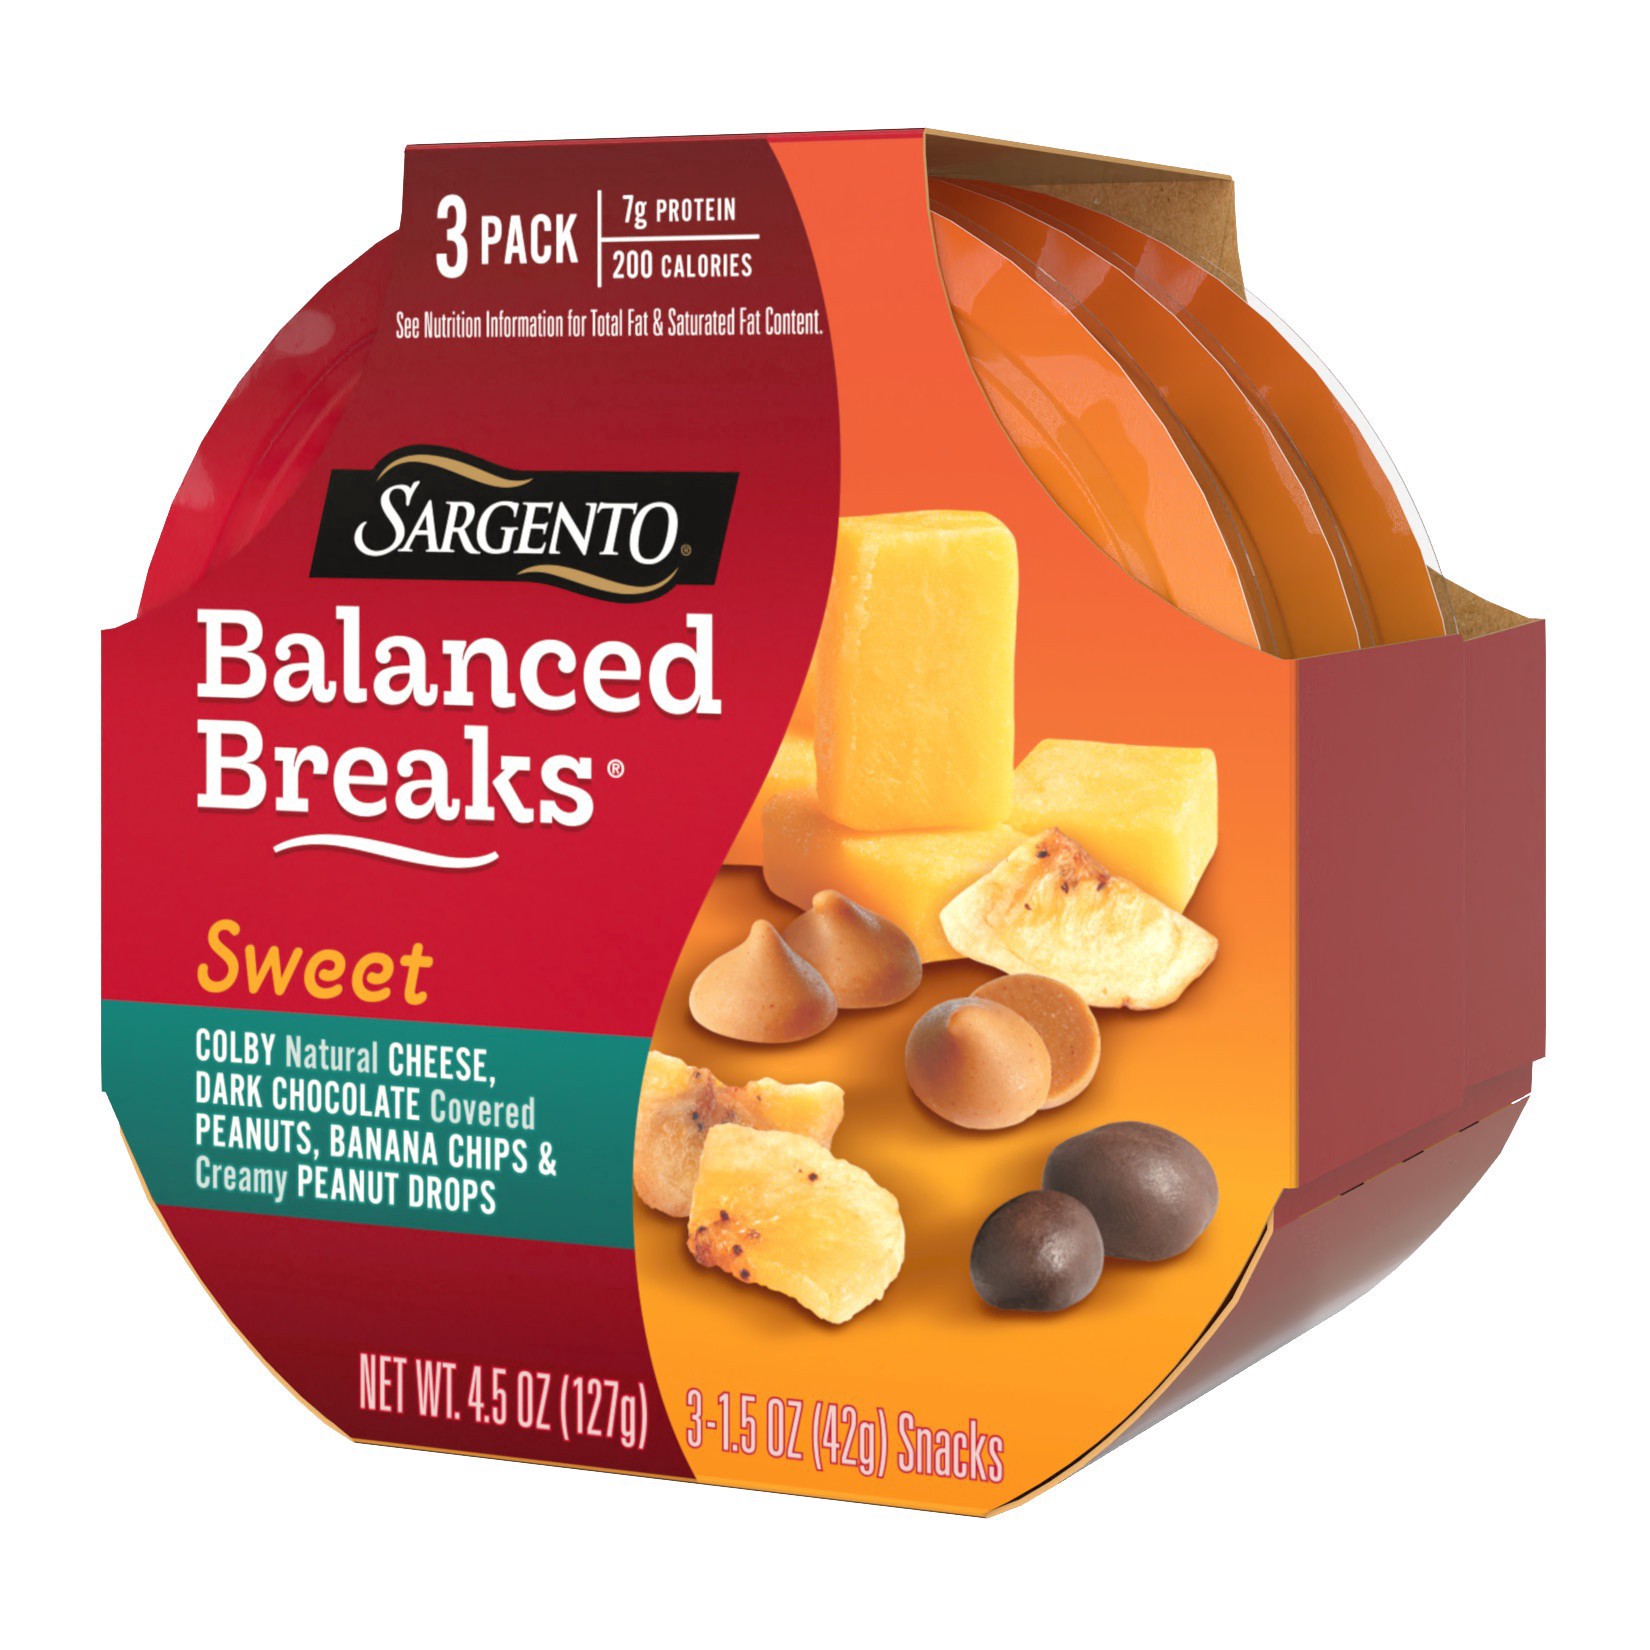 slide 9 of 17, Sargento Sweet Balanced Breaks with Colby Natural Cheese, Dark Chocolate Covered Peanuts, Banana Chips and Creamy Peanut Drops, 1.5 oz., 3-Pack, 4.5 oz